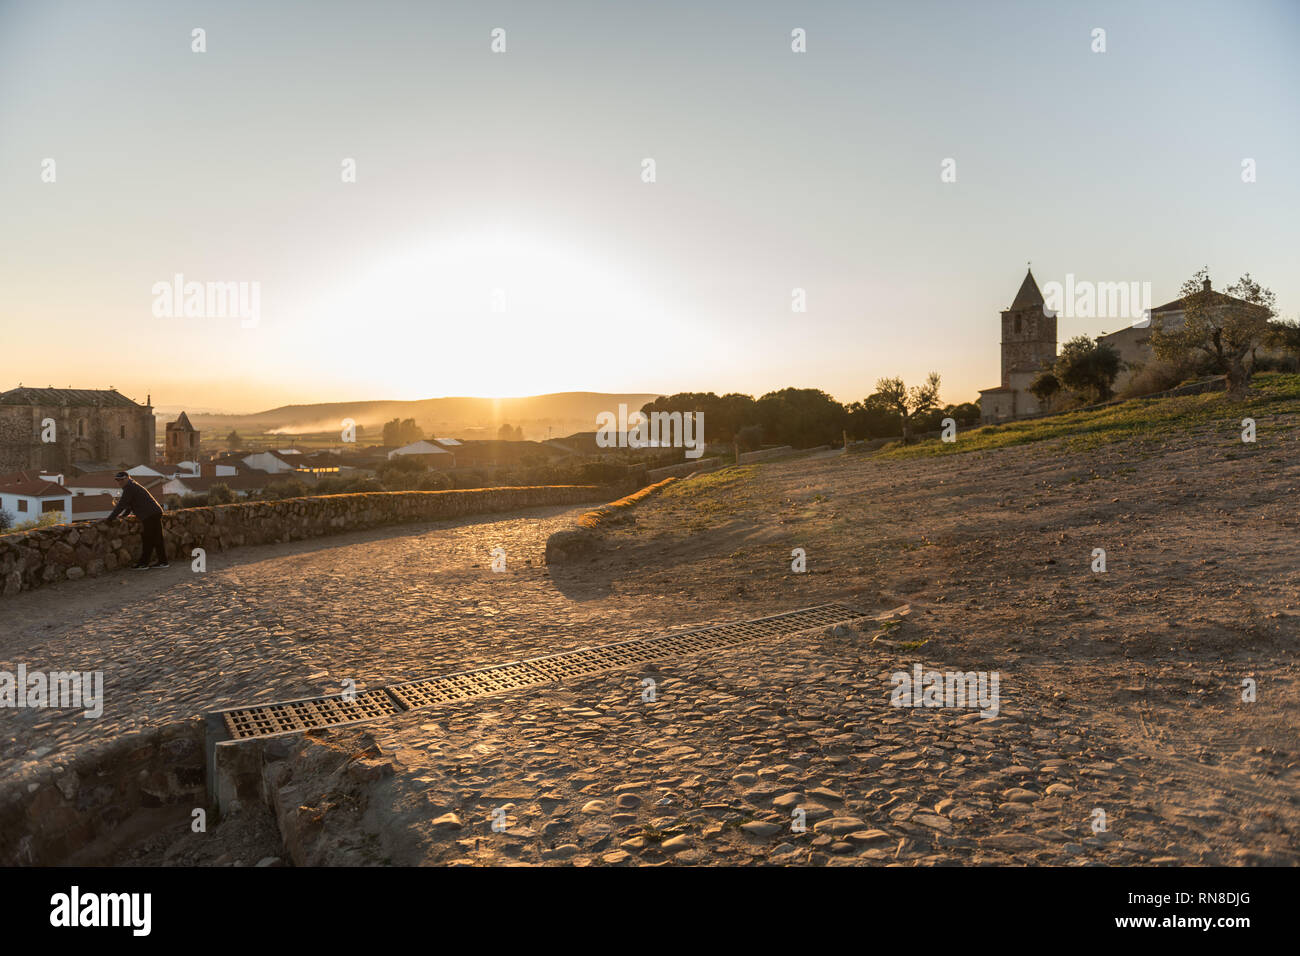 An older man contemplates the sunset over the village in Medellin, Extremadura, Spain. Stock Photo